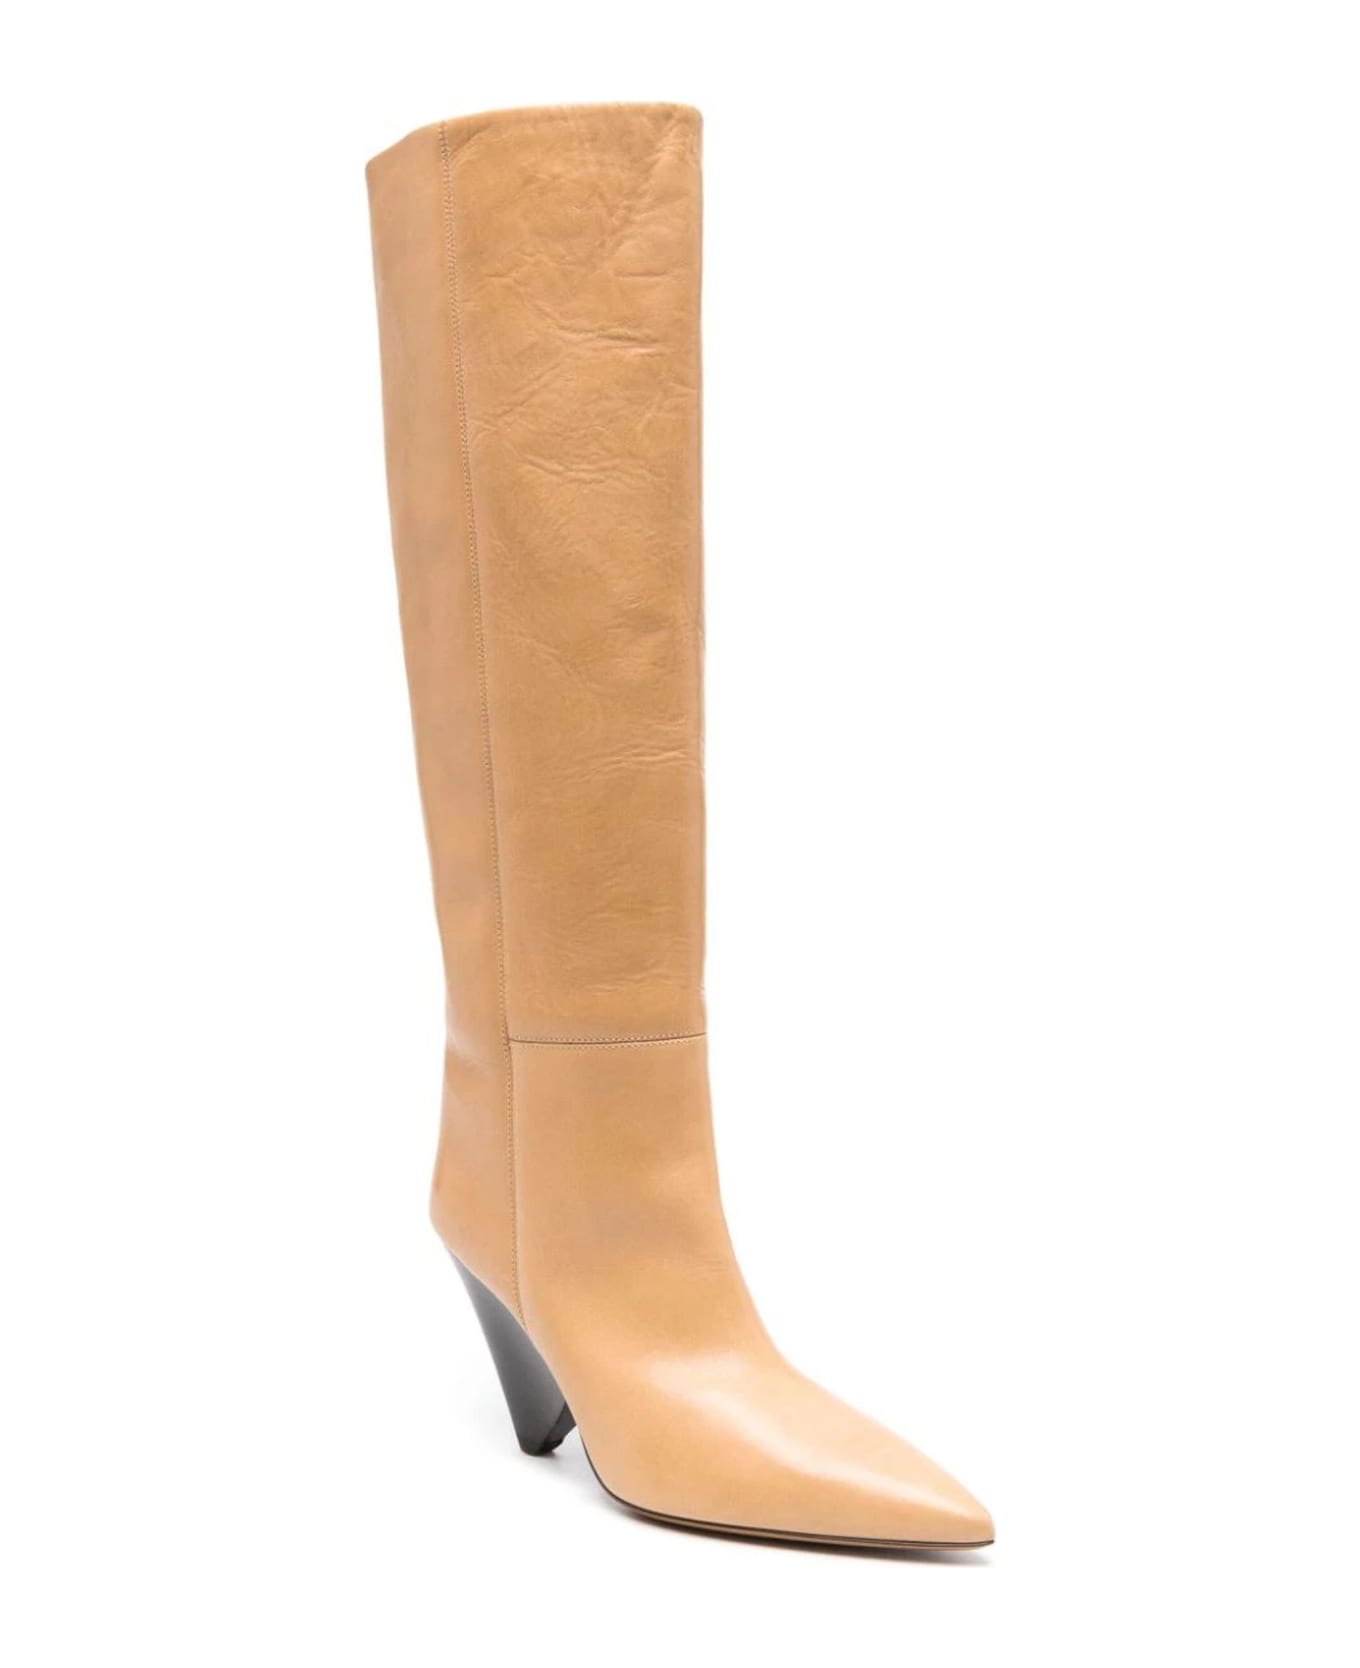 Isabel Marant Calf Leather Boots - Brown